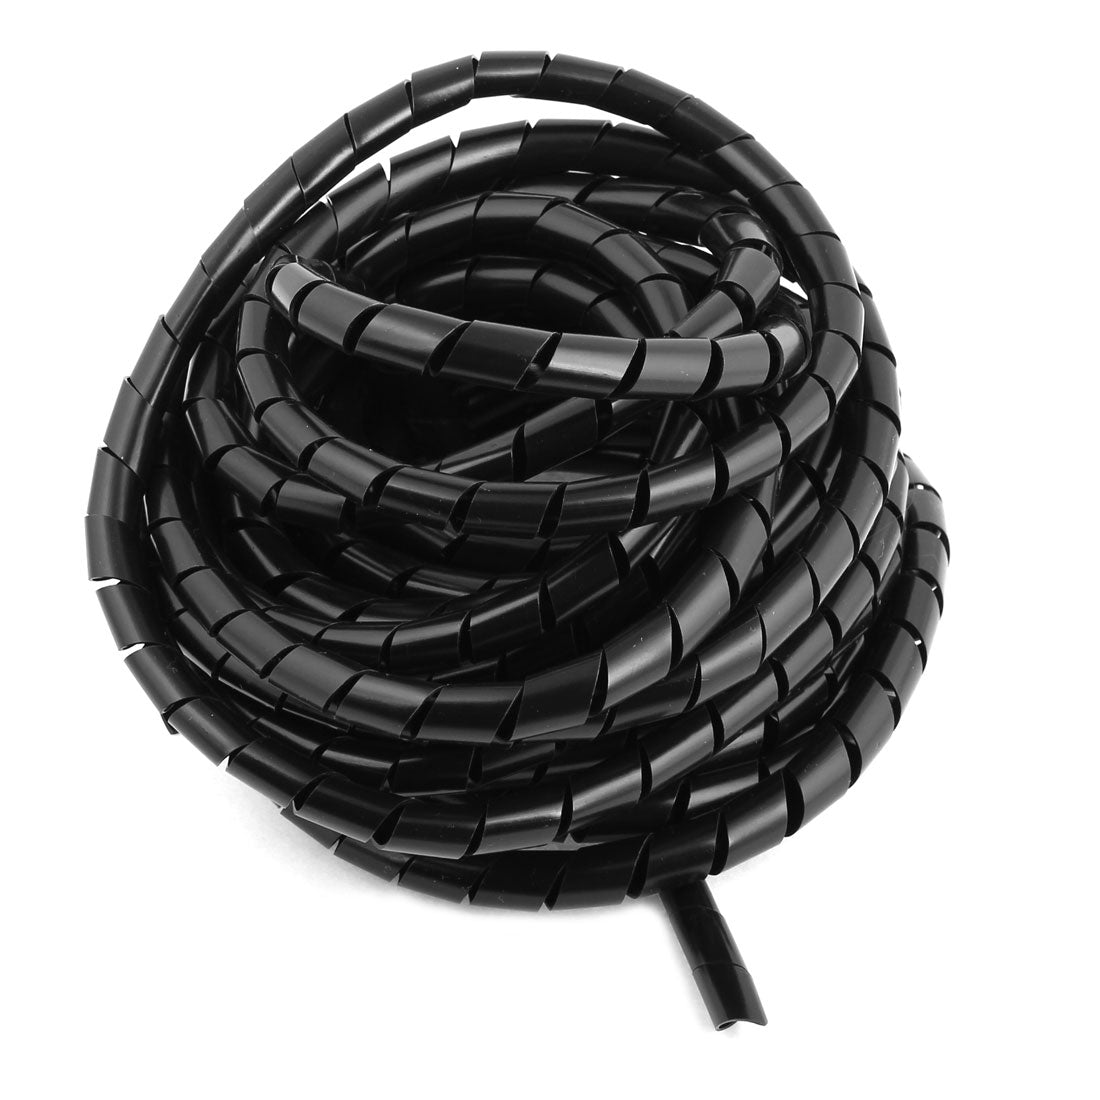 uxcell Uxcell 6.5M Long Flexible Black PE Polyethylene Spiral Cable Wire Wrap Tube 10mm